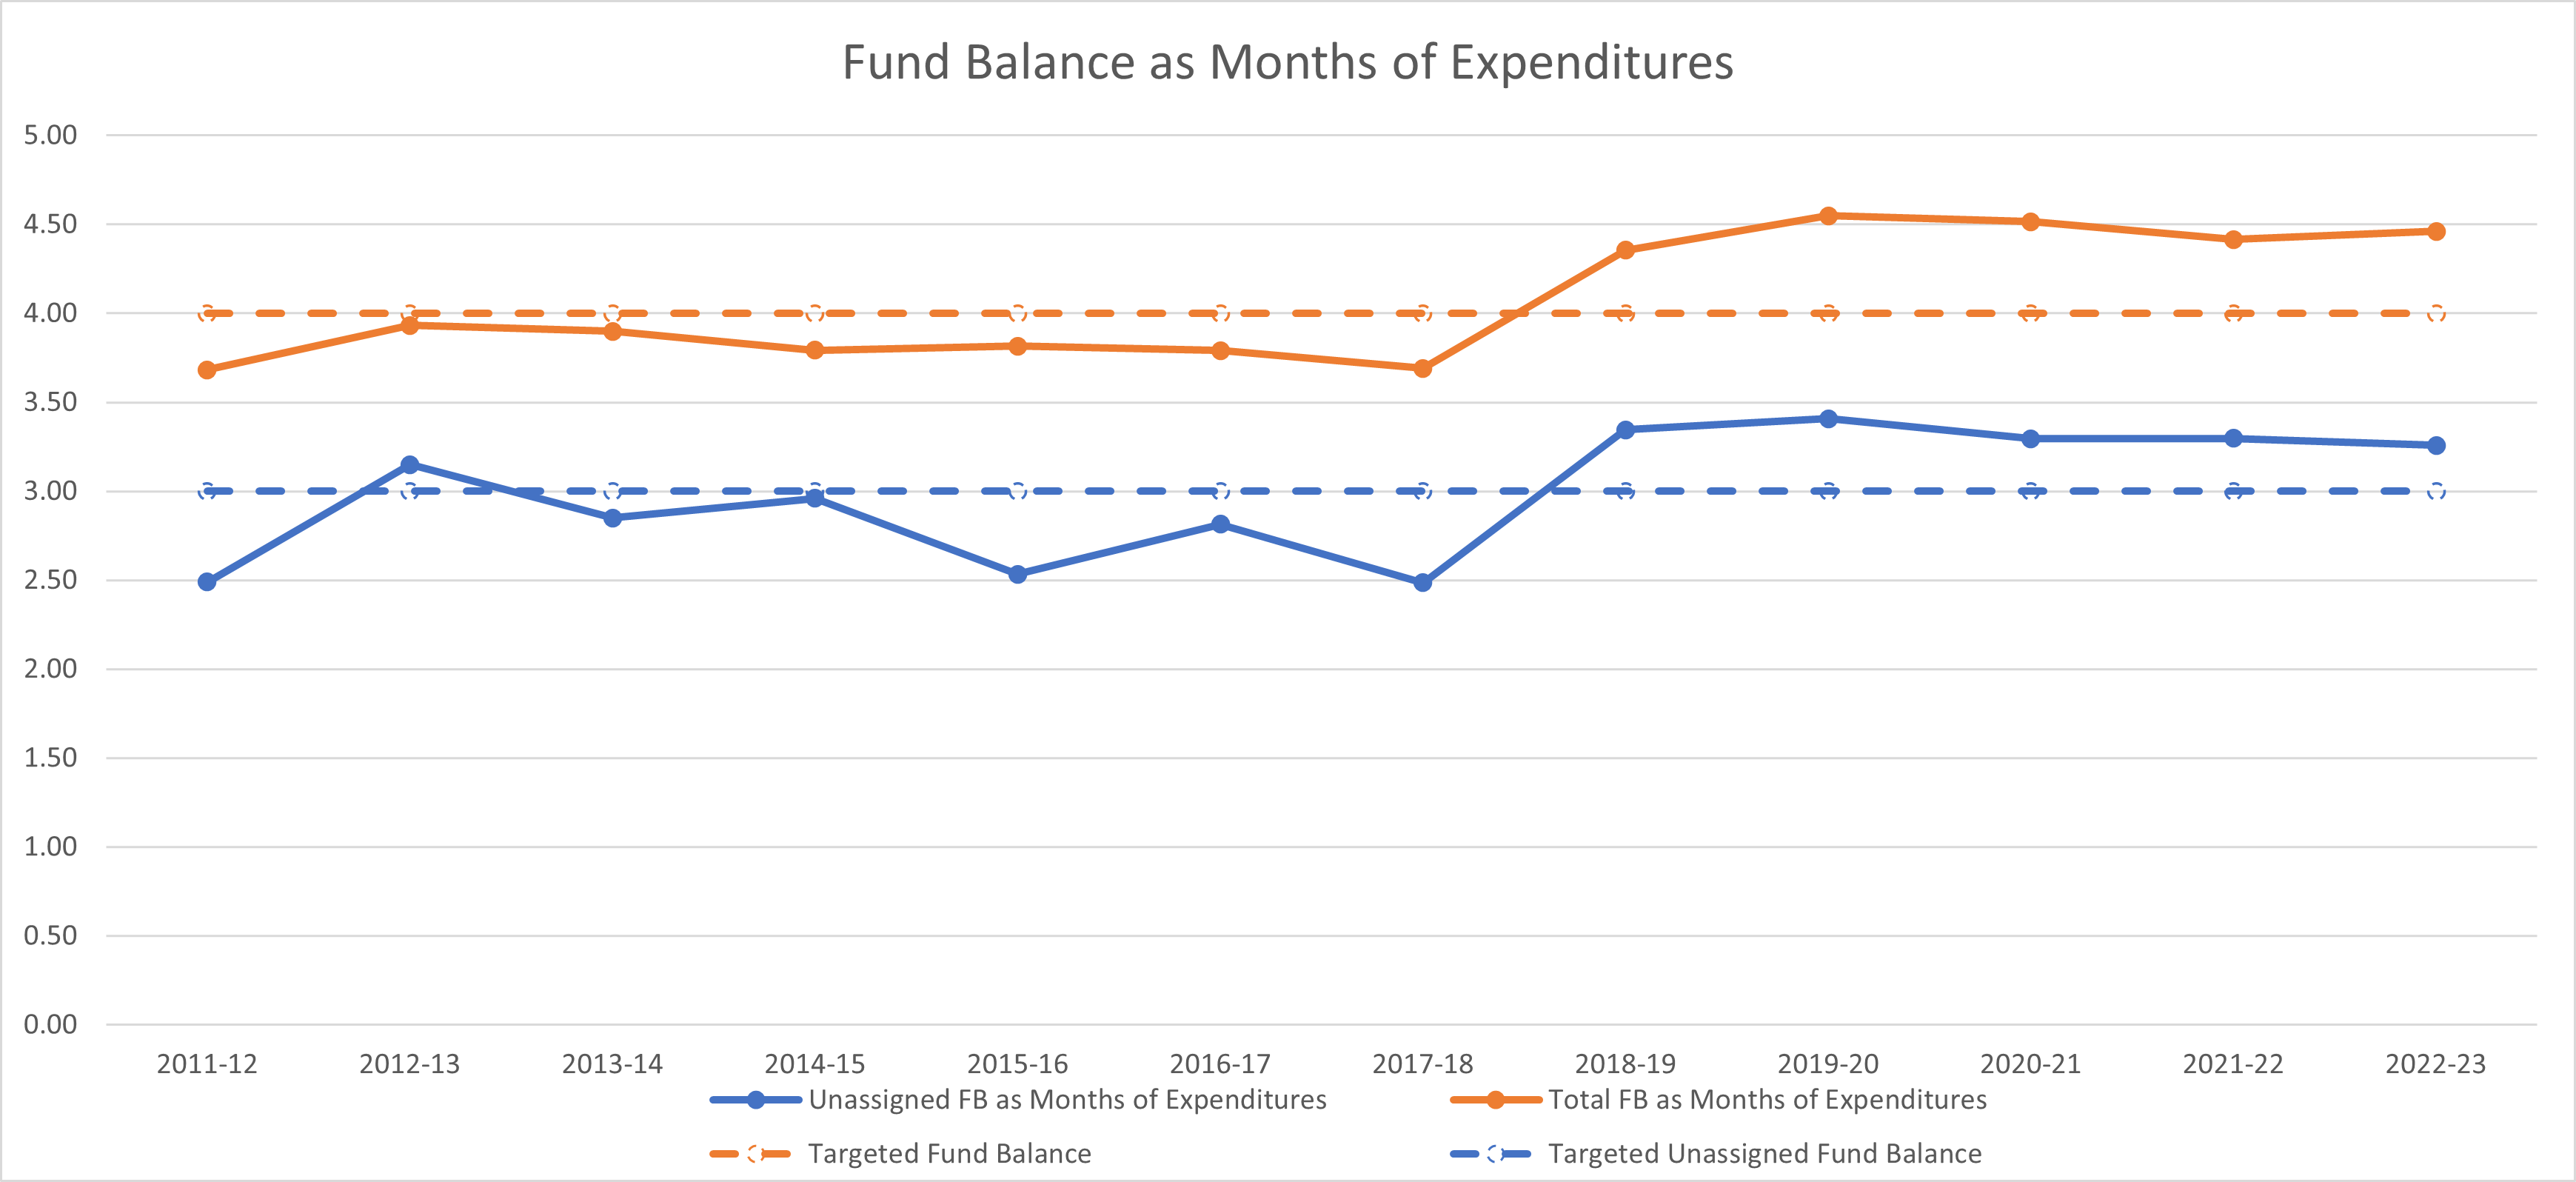 Fund Balance as Months of Expenditures